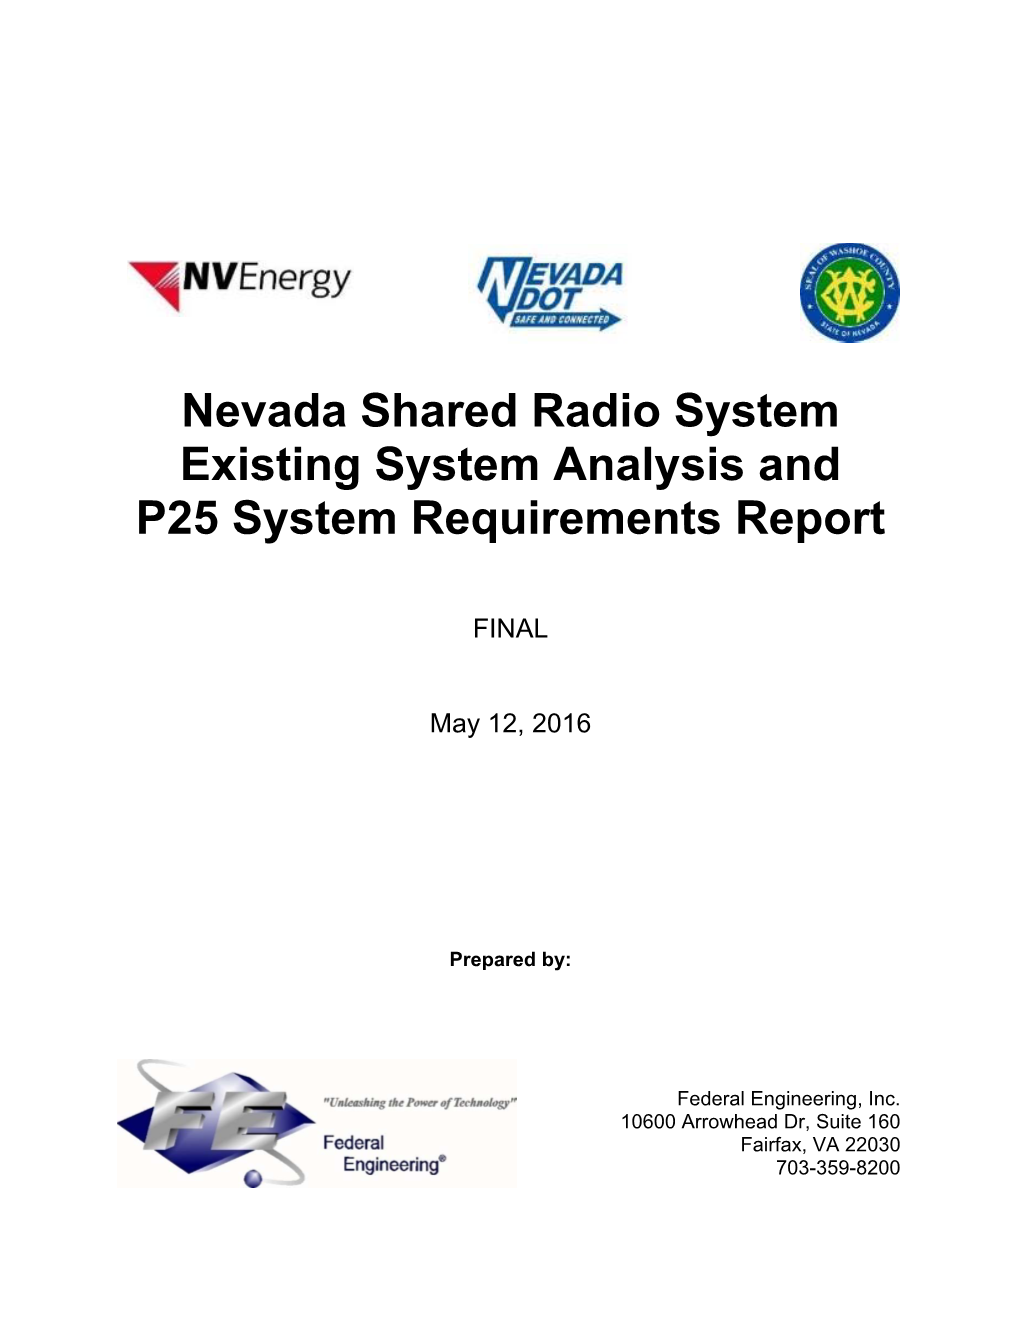 Nevada Shared Radio System Existing System Analysis and P25 System Requirements Report